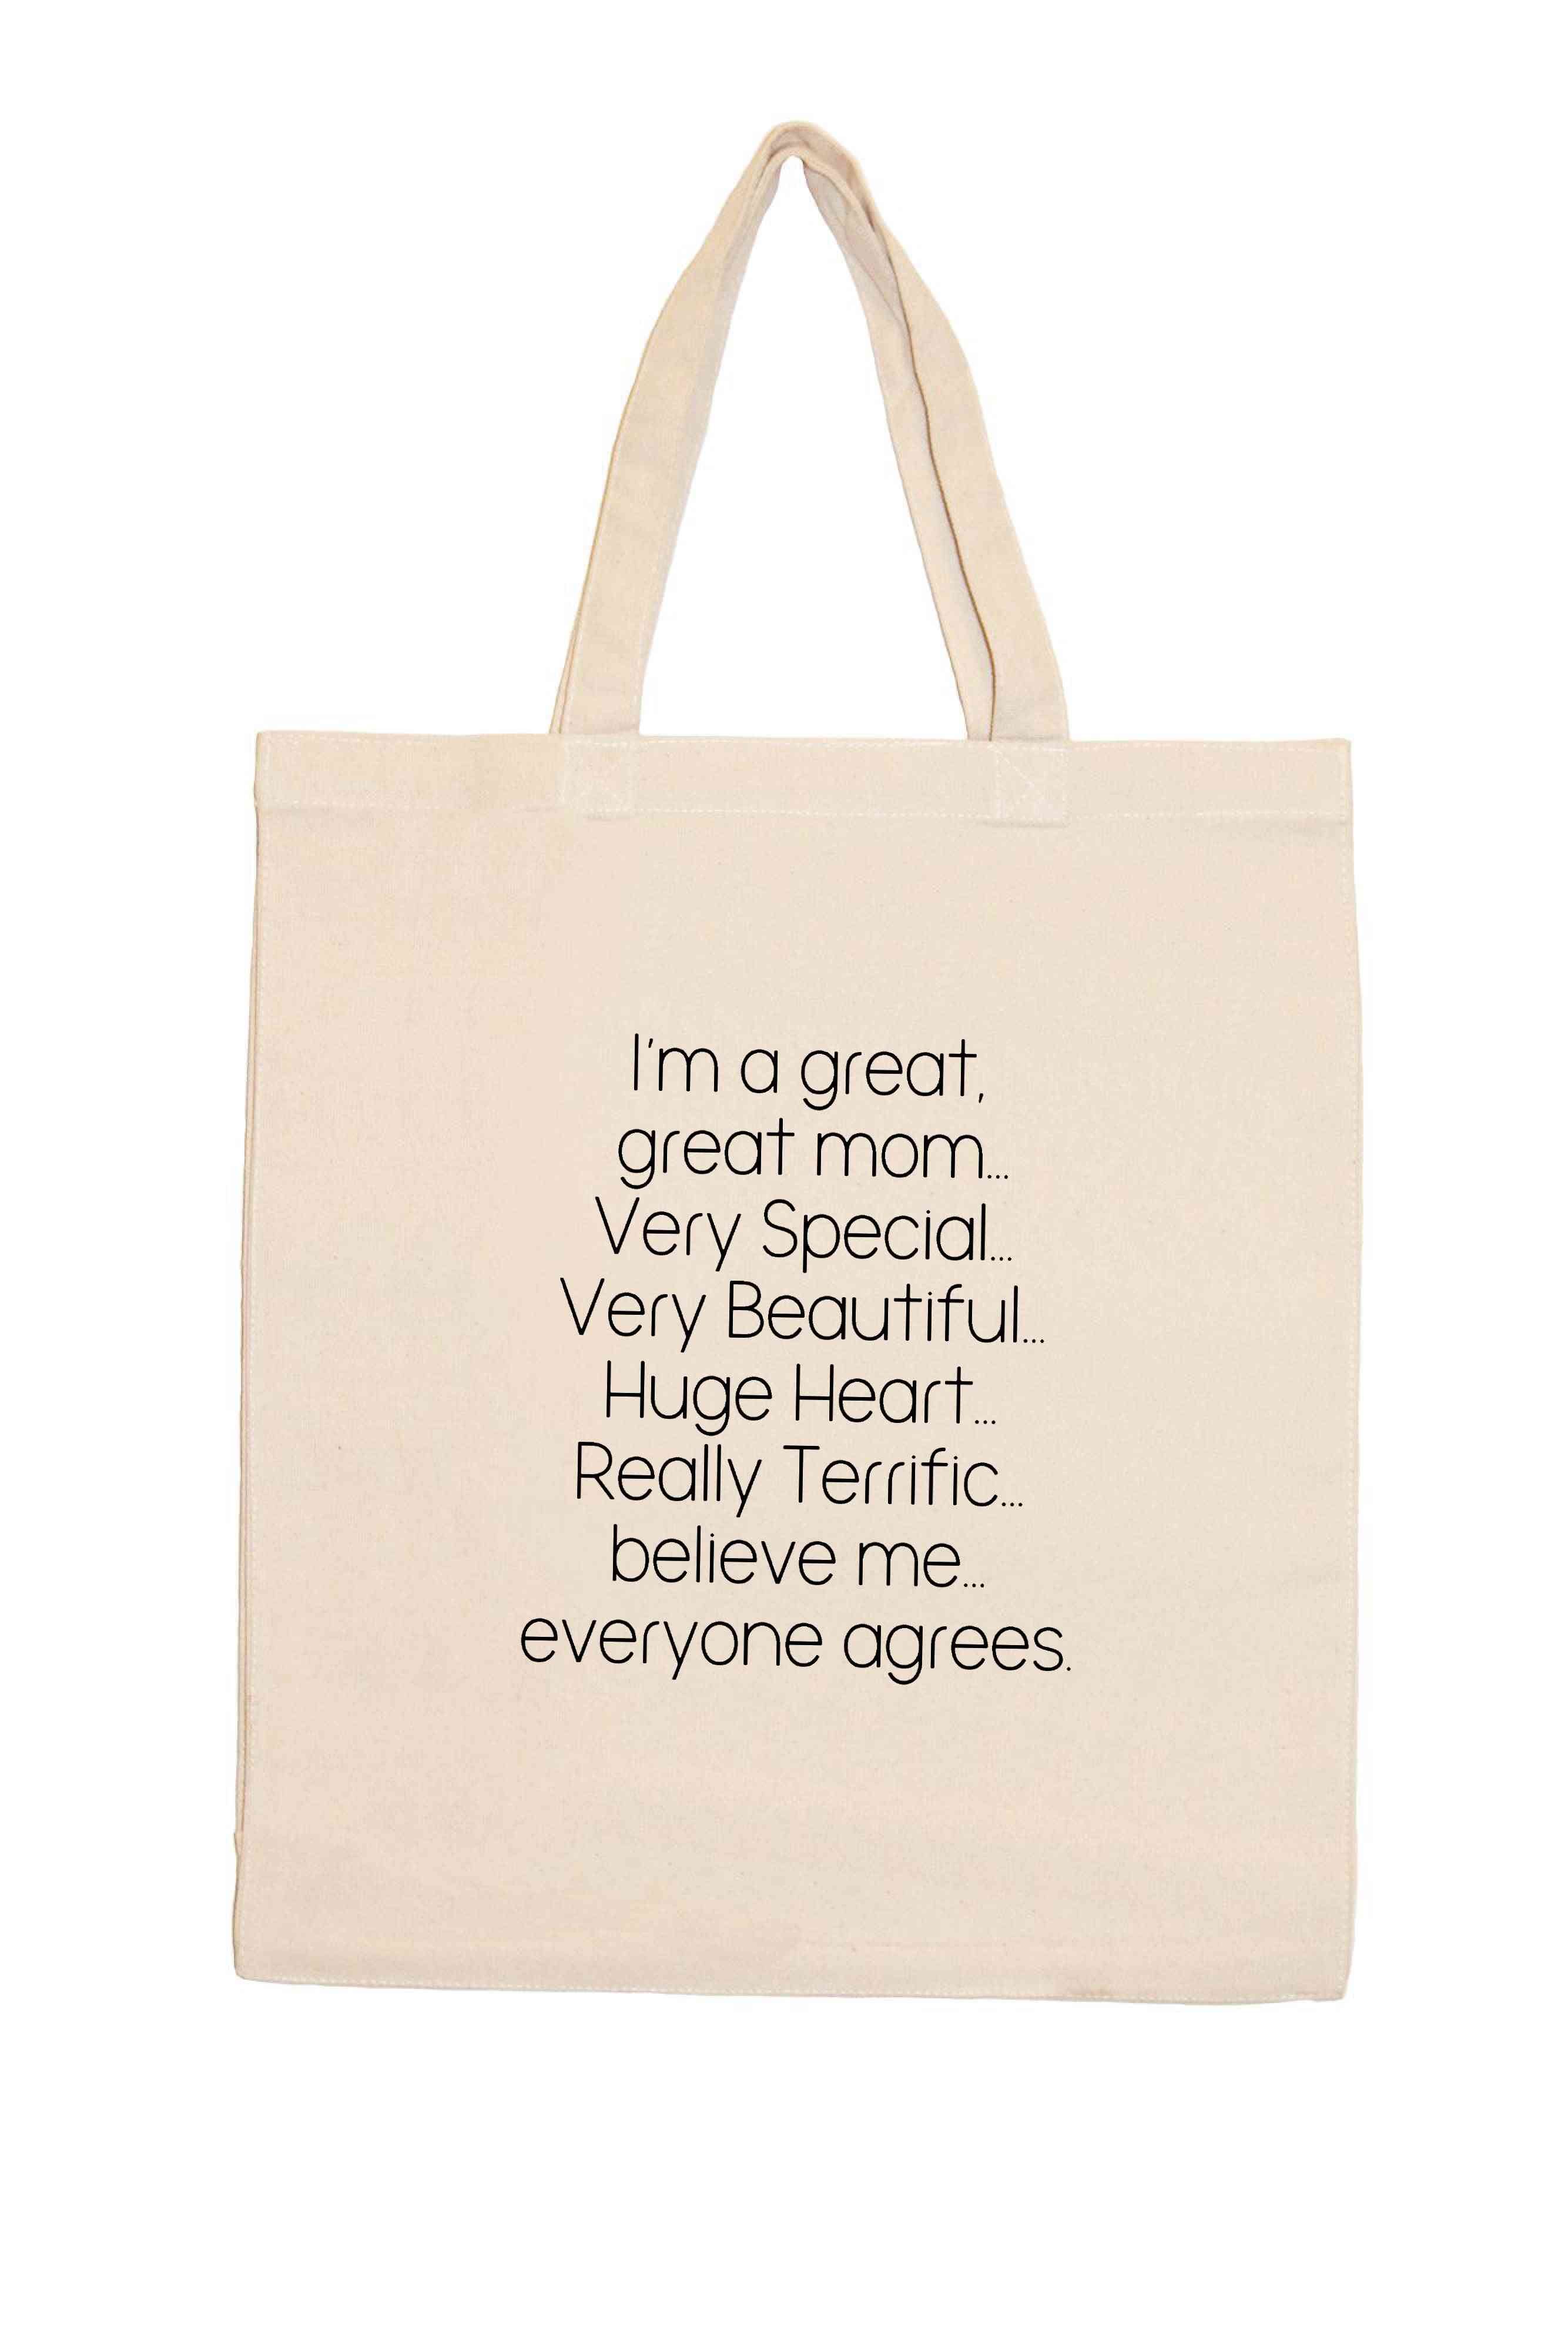 I’m A Great, Great Mom…very Special Shopping Totes